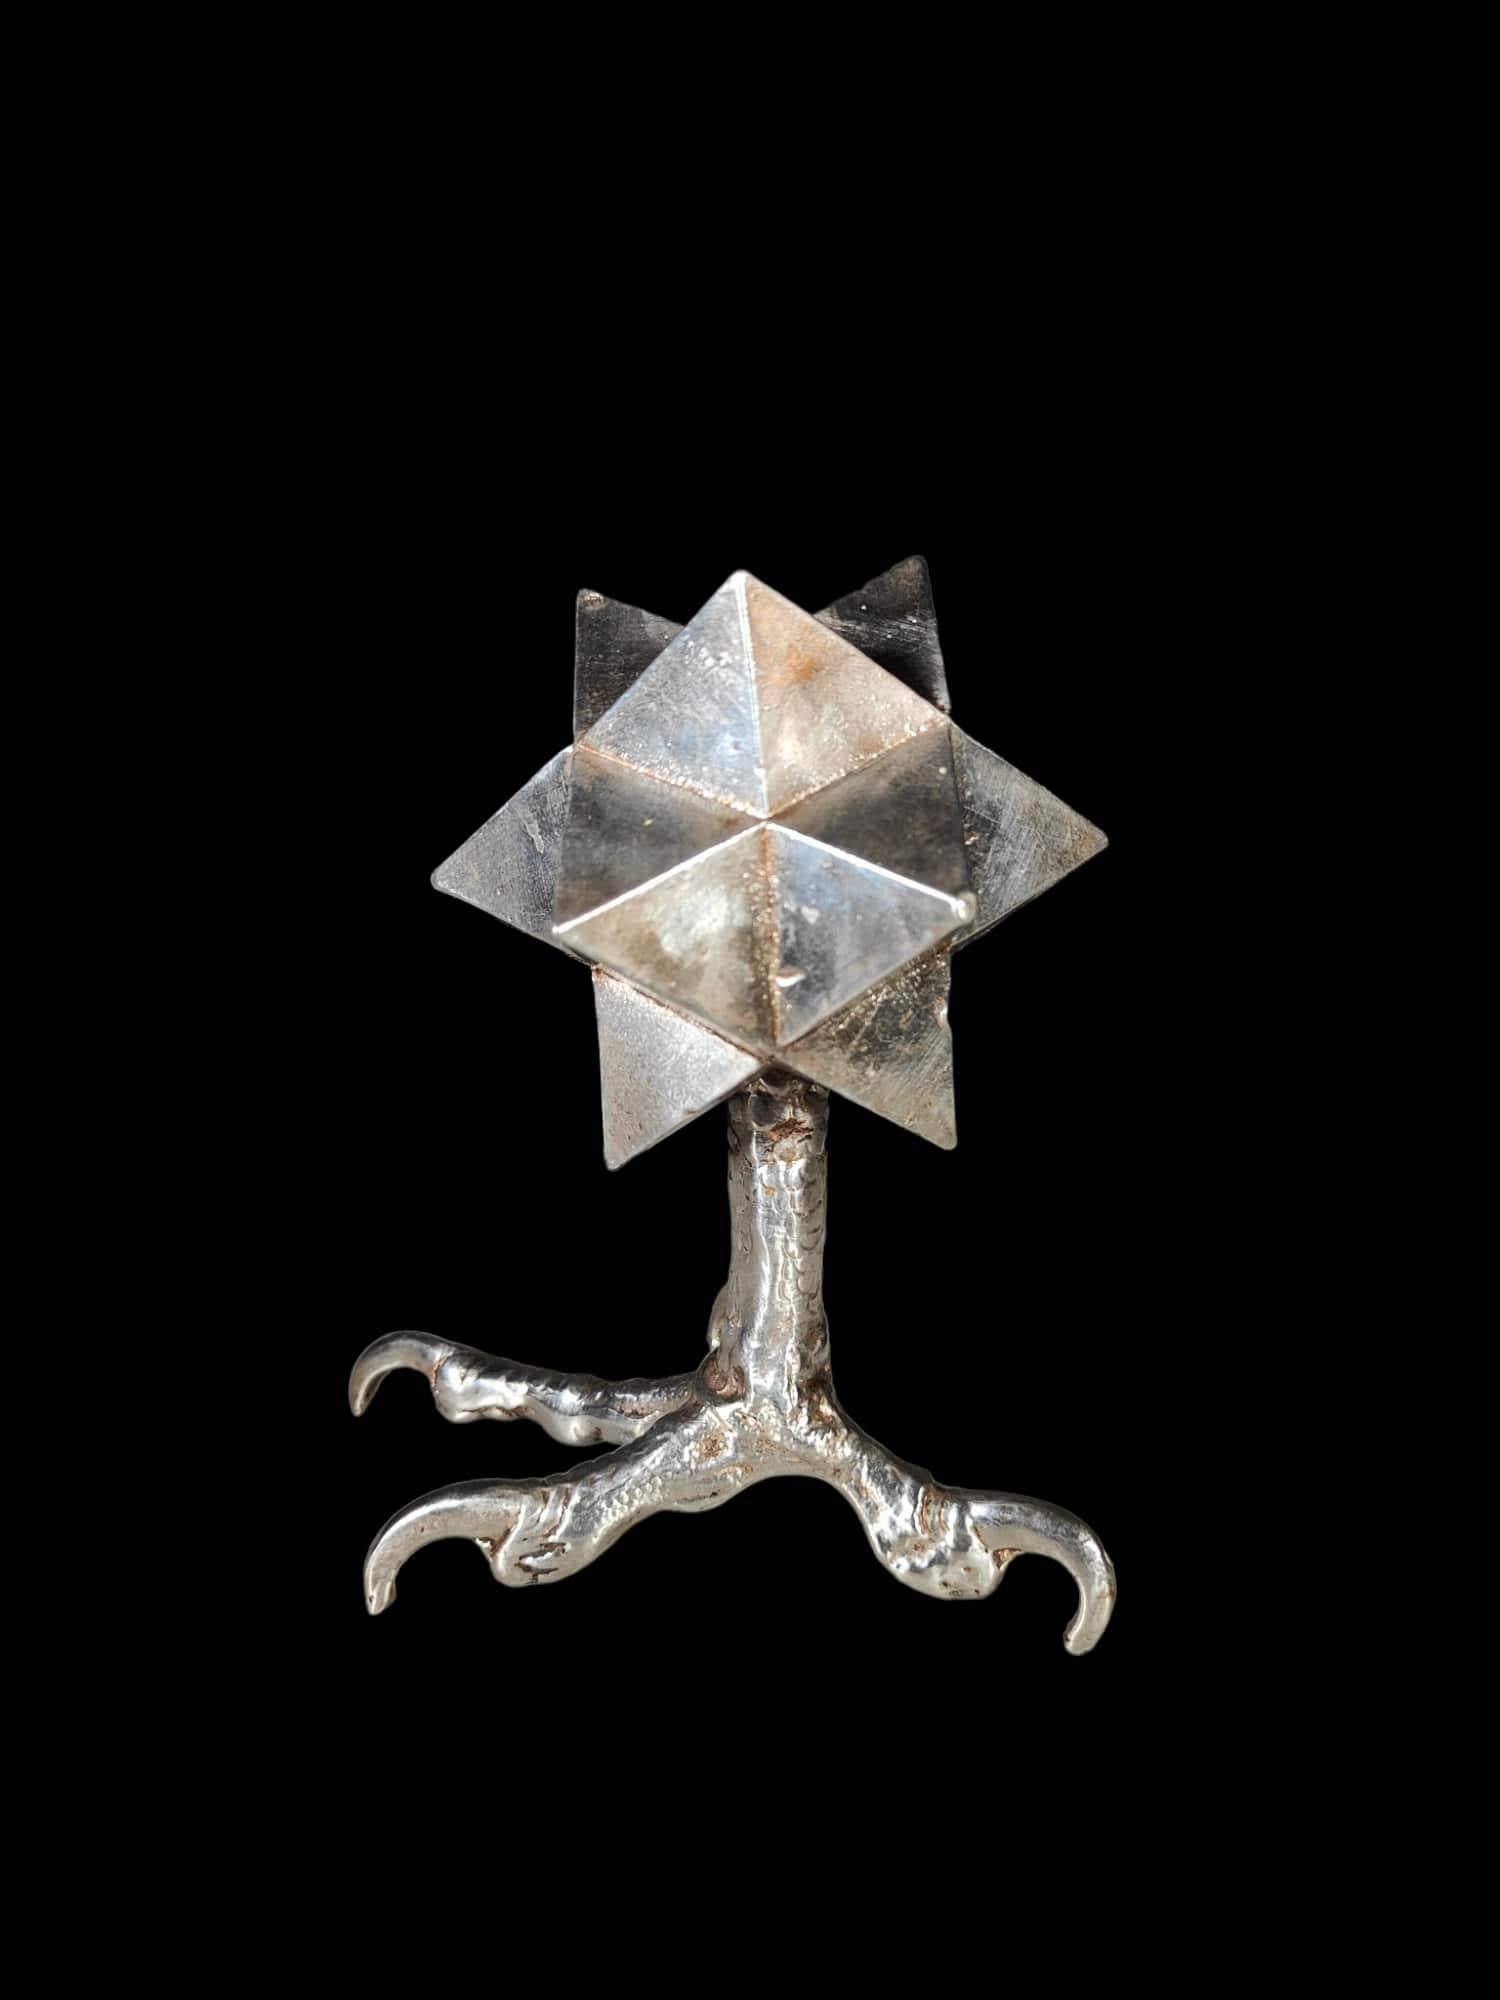 Metallic Polyhedron From The 19th Century – Hexaoctahedron With 48 Faces For Sale 8